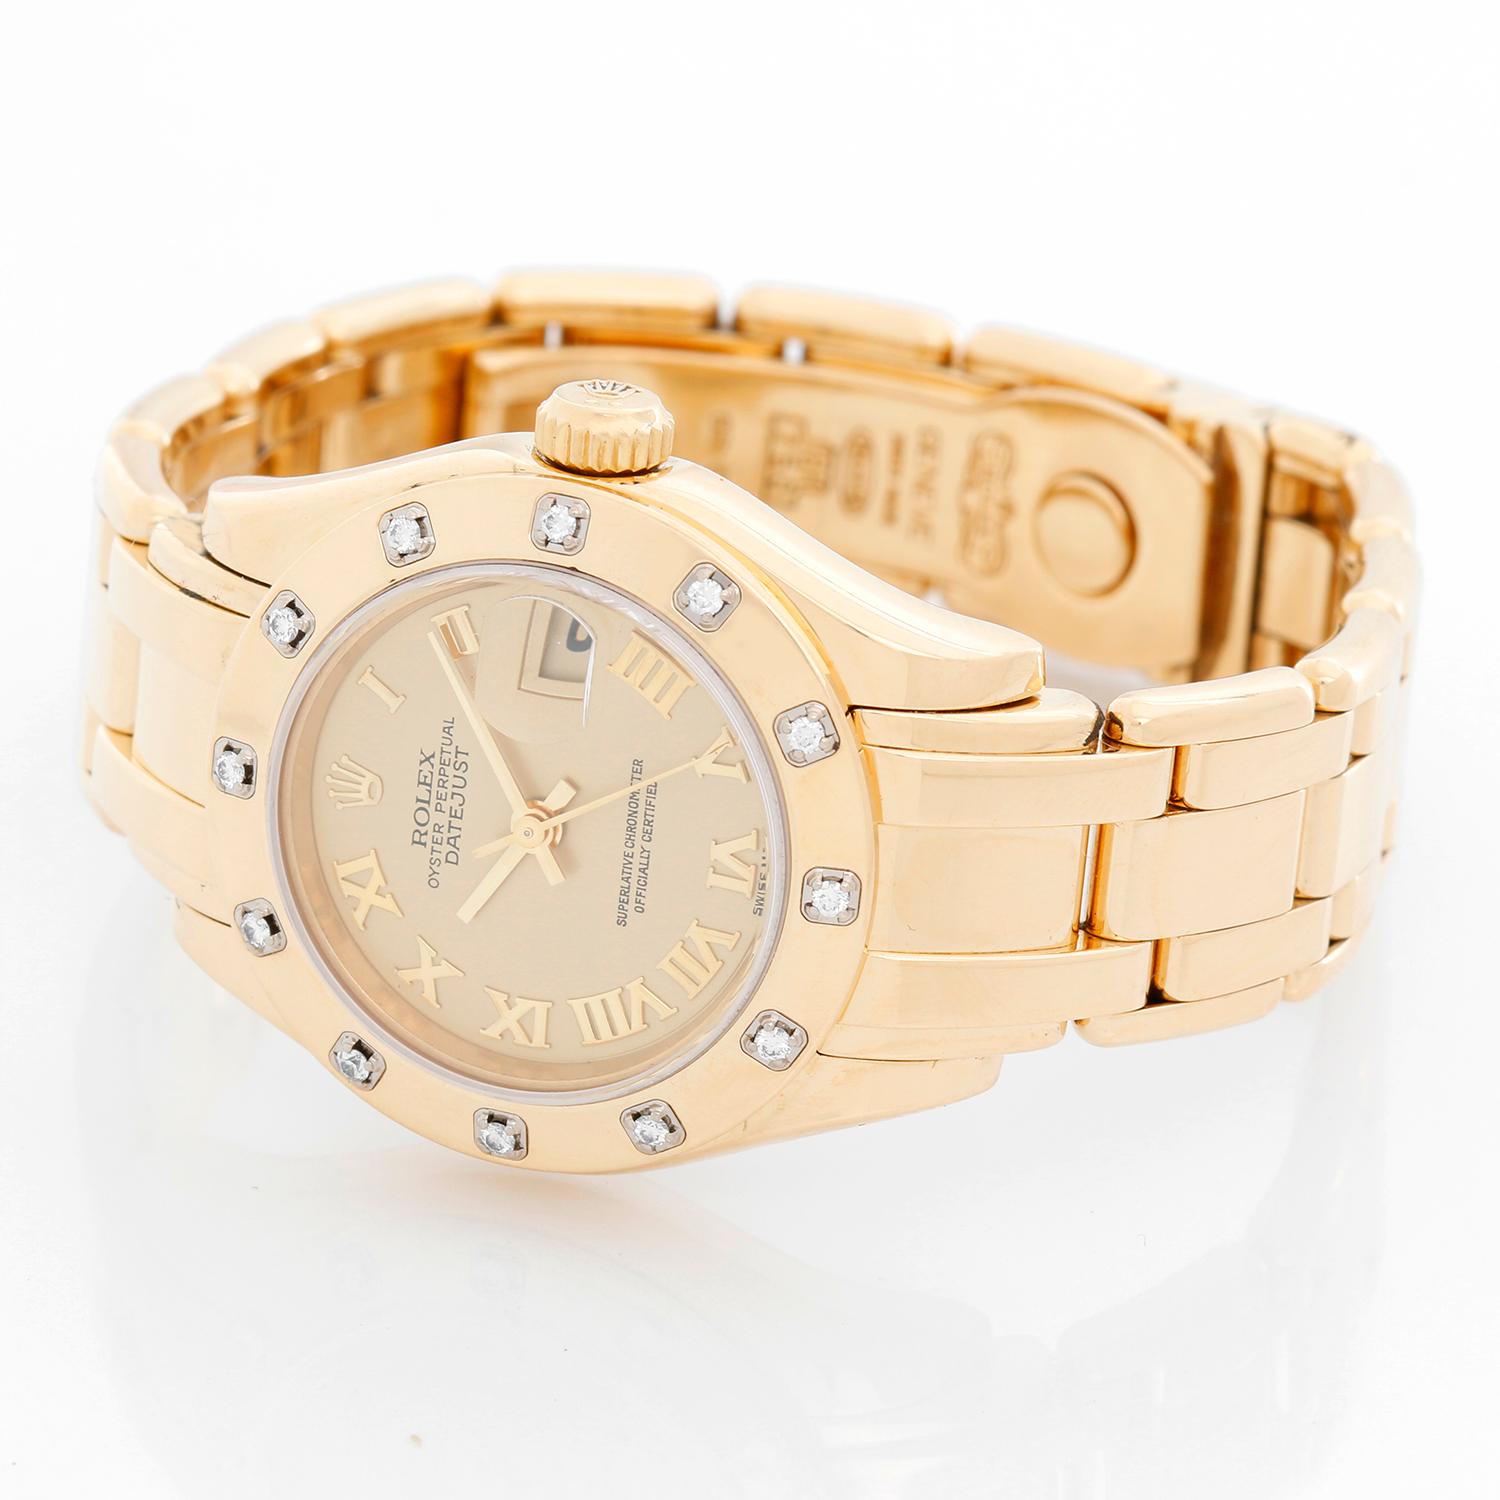 Rolex Lady Datejust Pearlmaster 18k Yellow Gold Ladies 69318 - Automatic winding, 31 jewels, Quickset, sapphire crystal. 18k yellow gold case with factory 12 diamond bezel (29mm diameter). Champagne dial with raised Roman numerals . 18k yellow gold